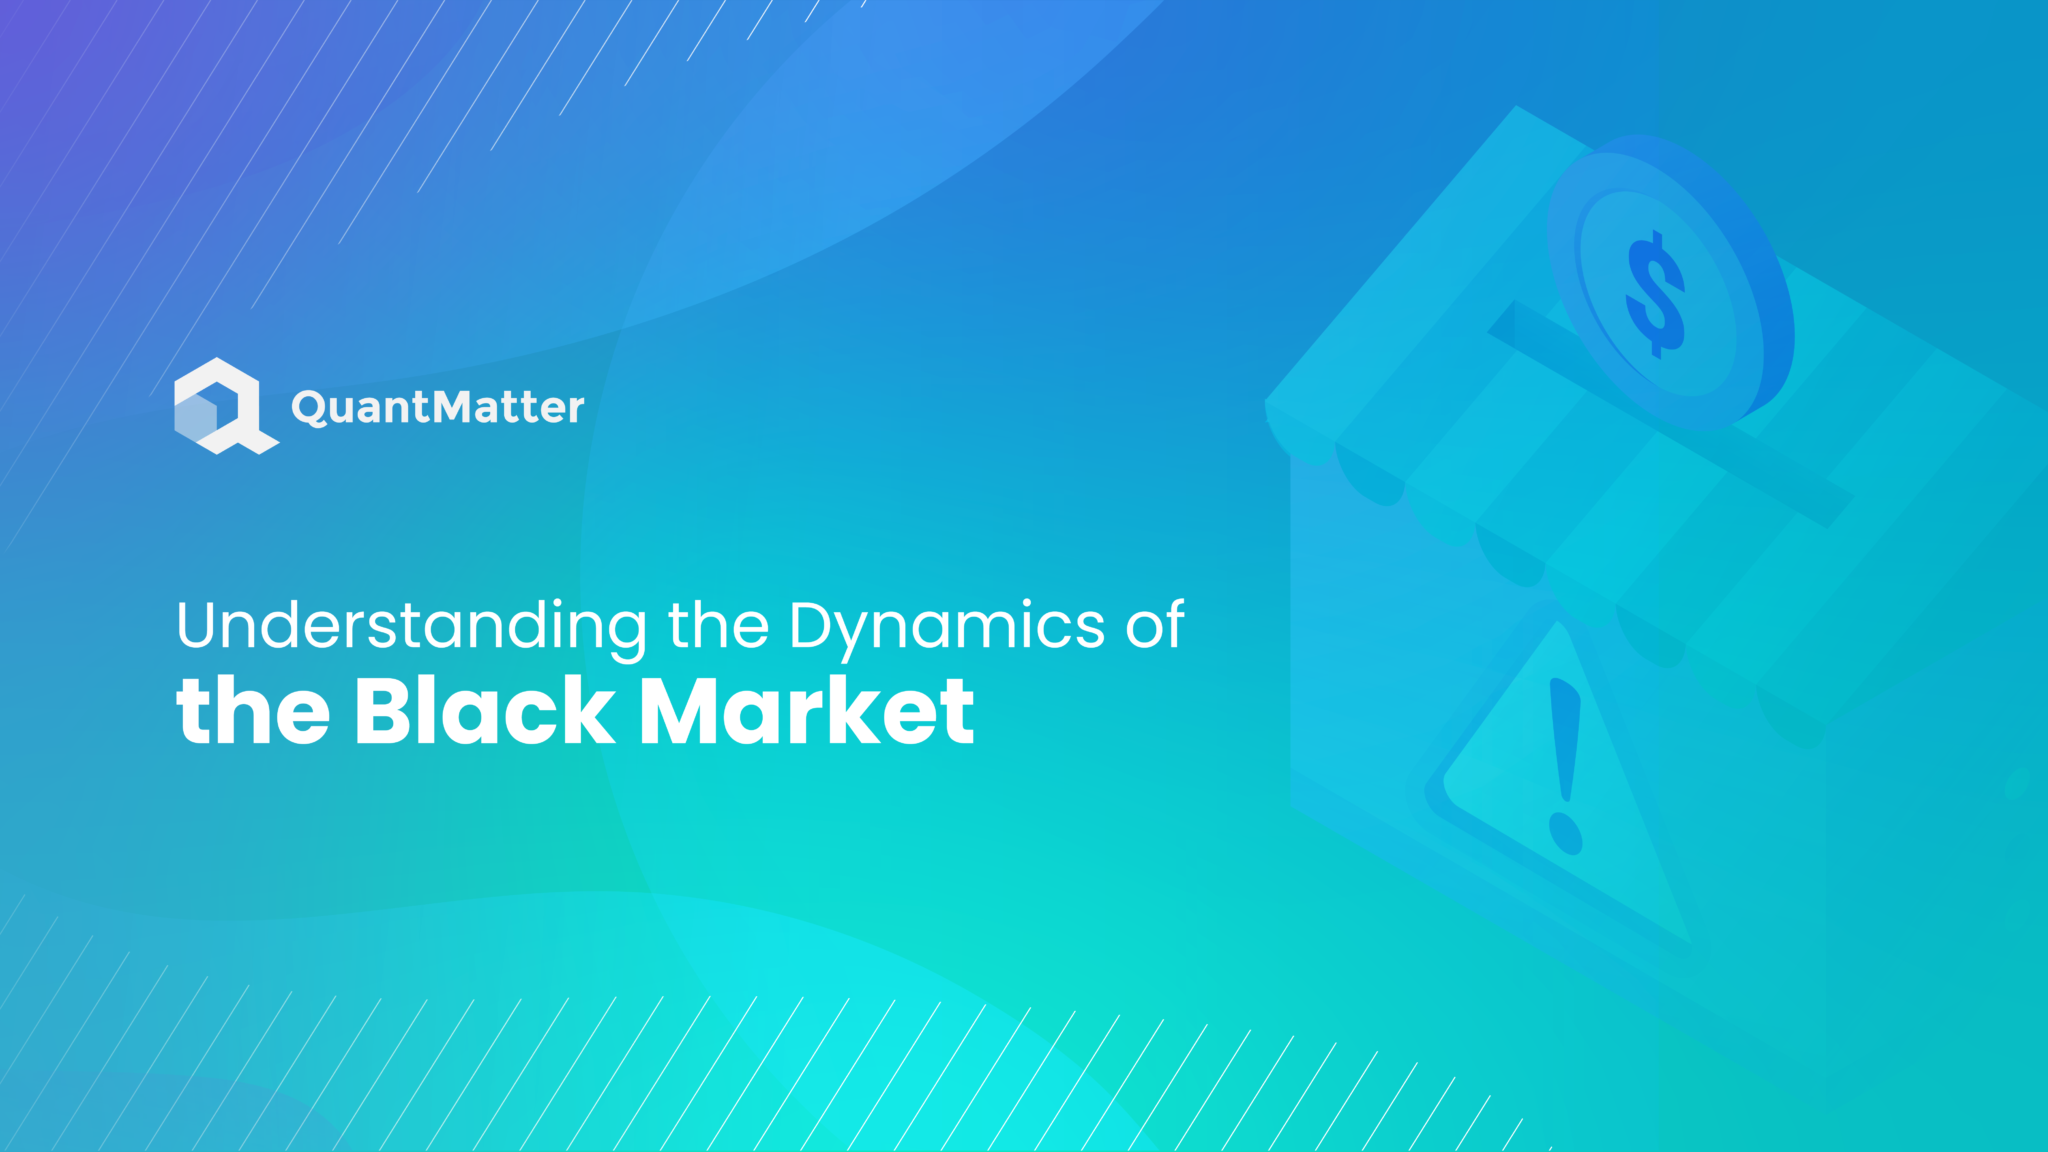 What is Black Market?